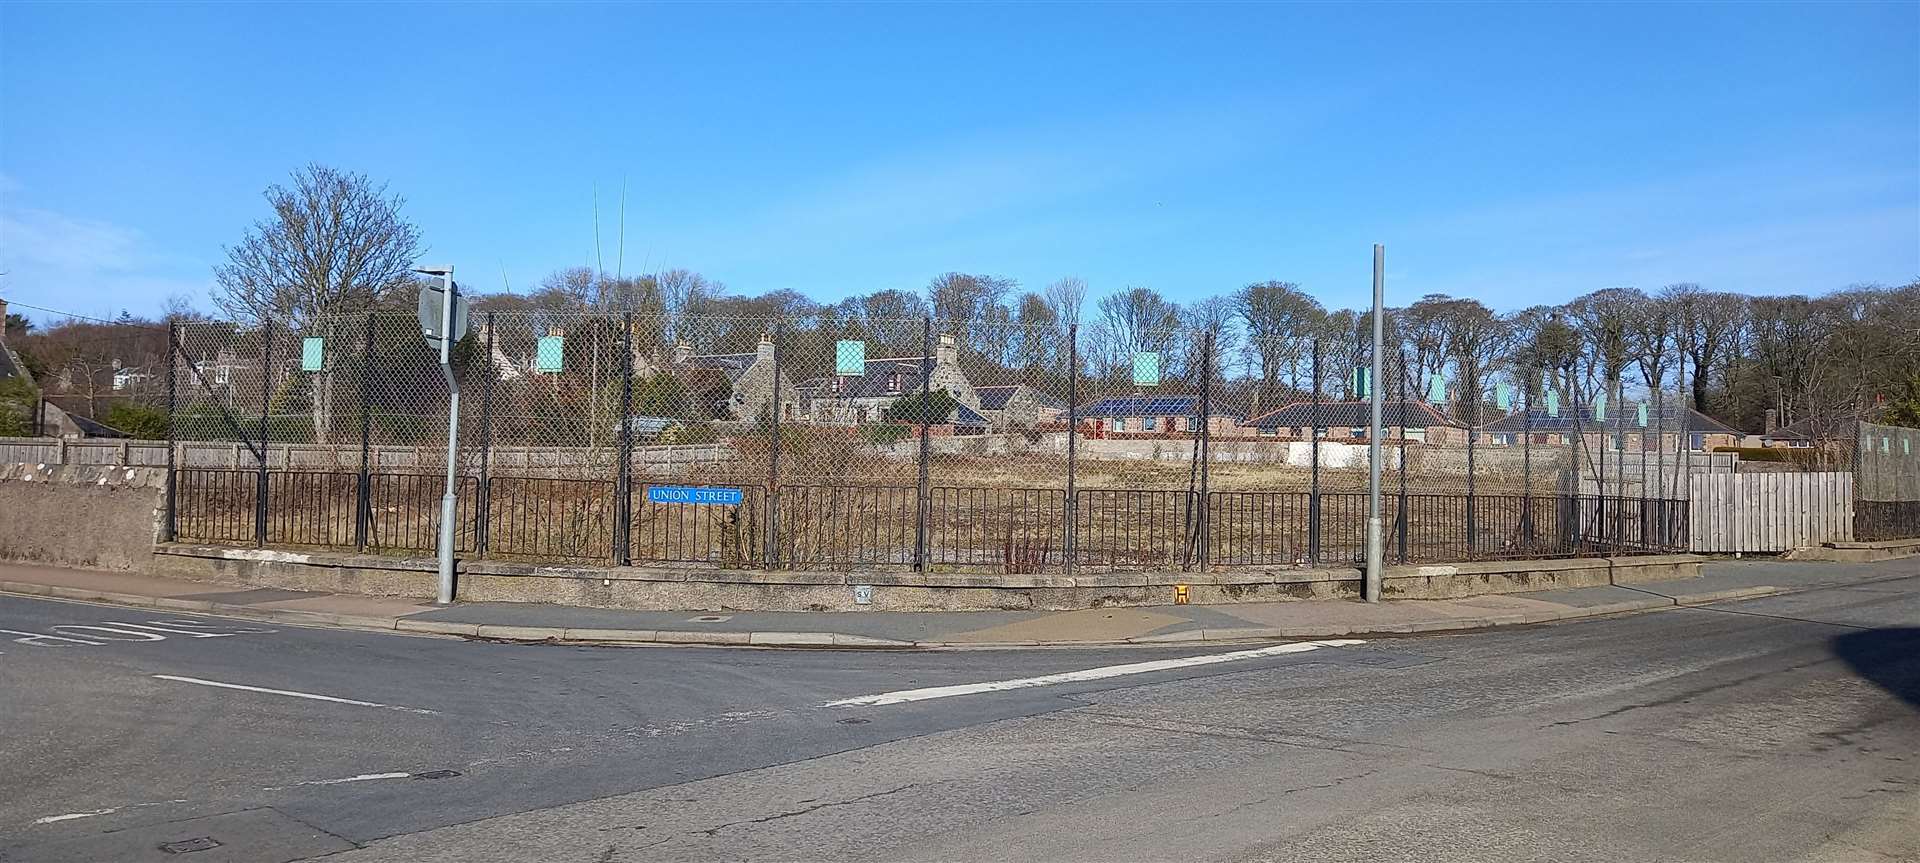 The site of the former old Ellon Academy has been vacant for a number of years.